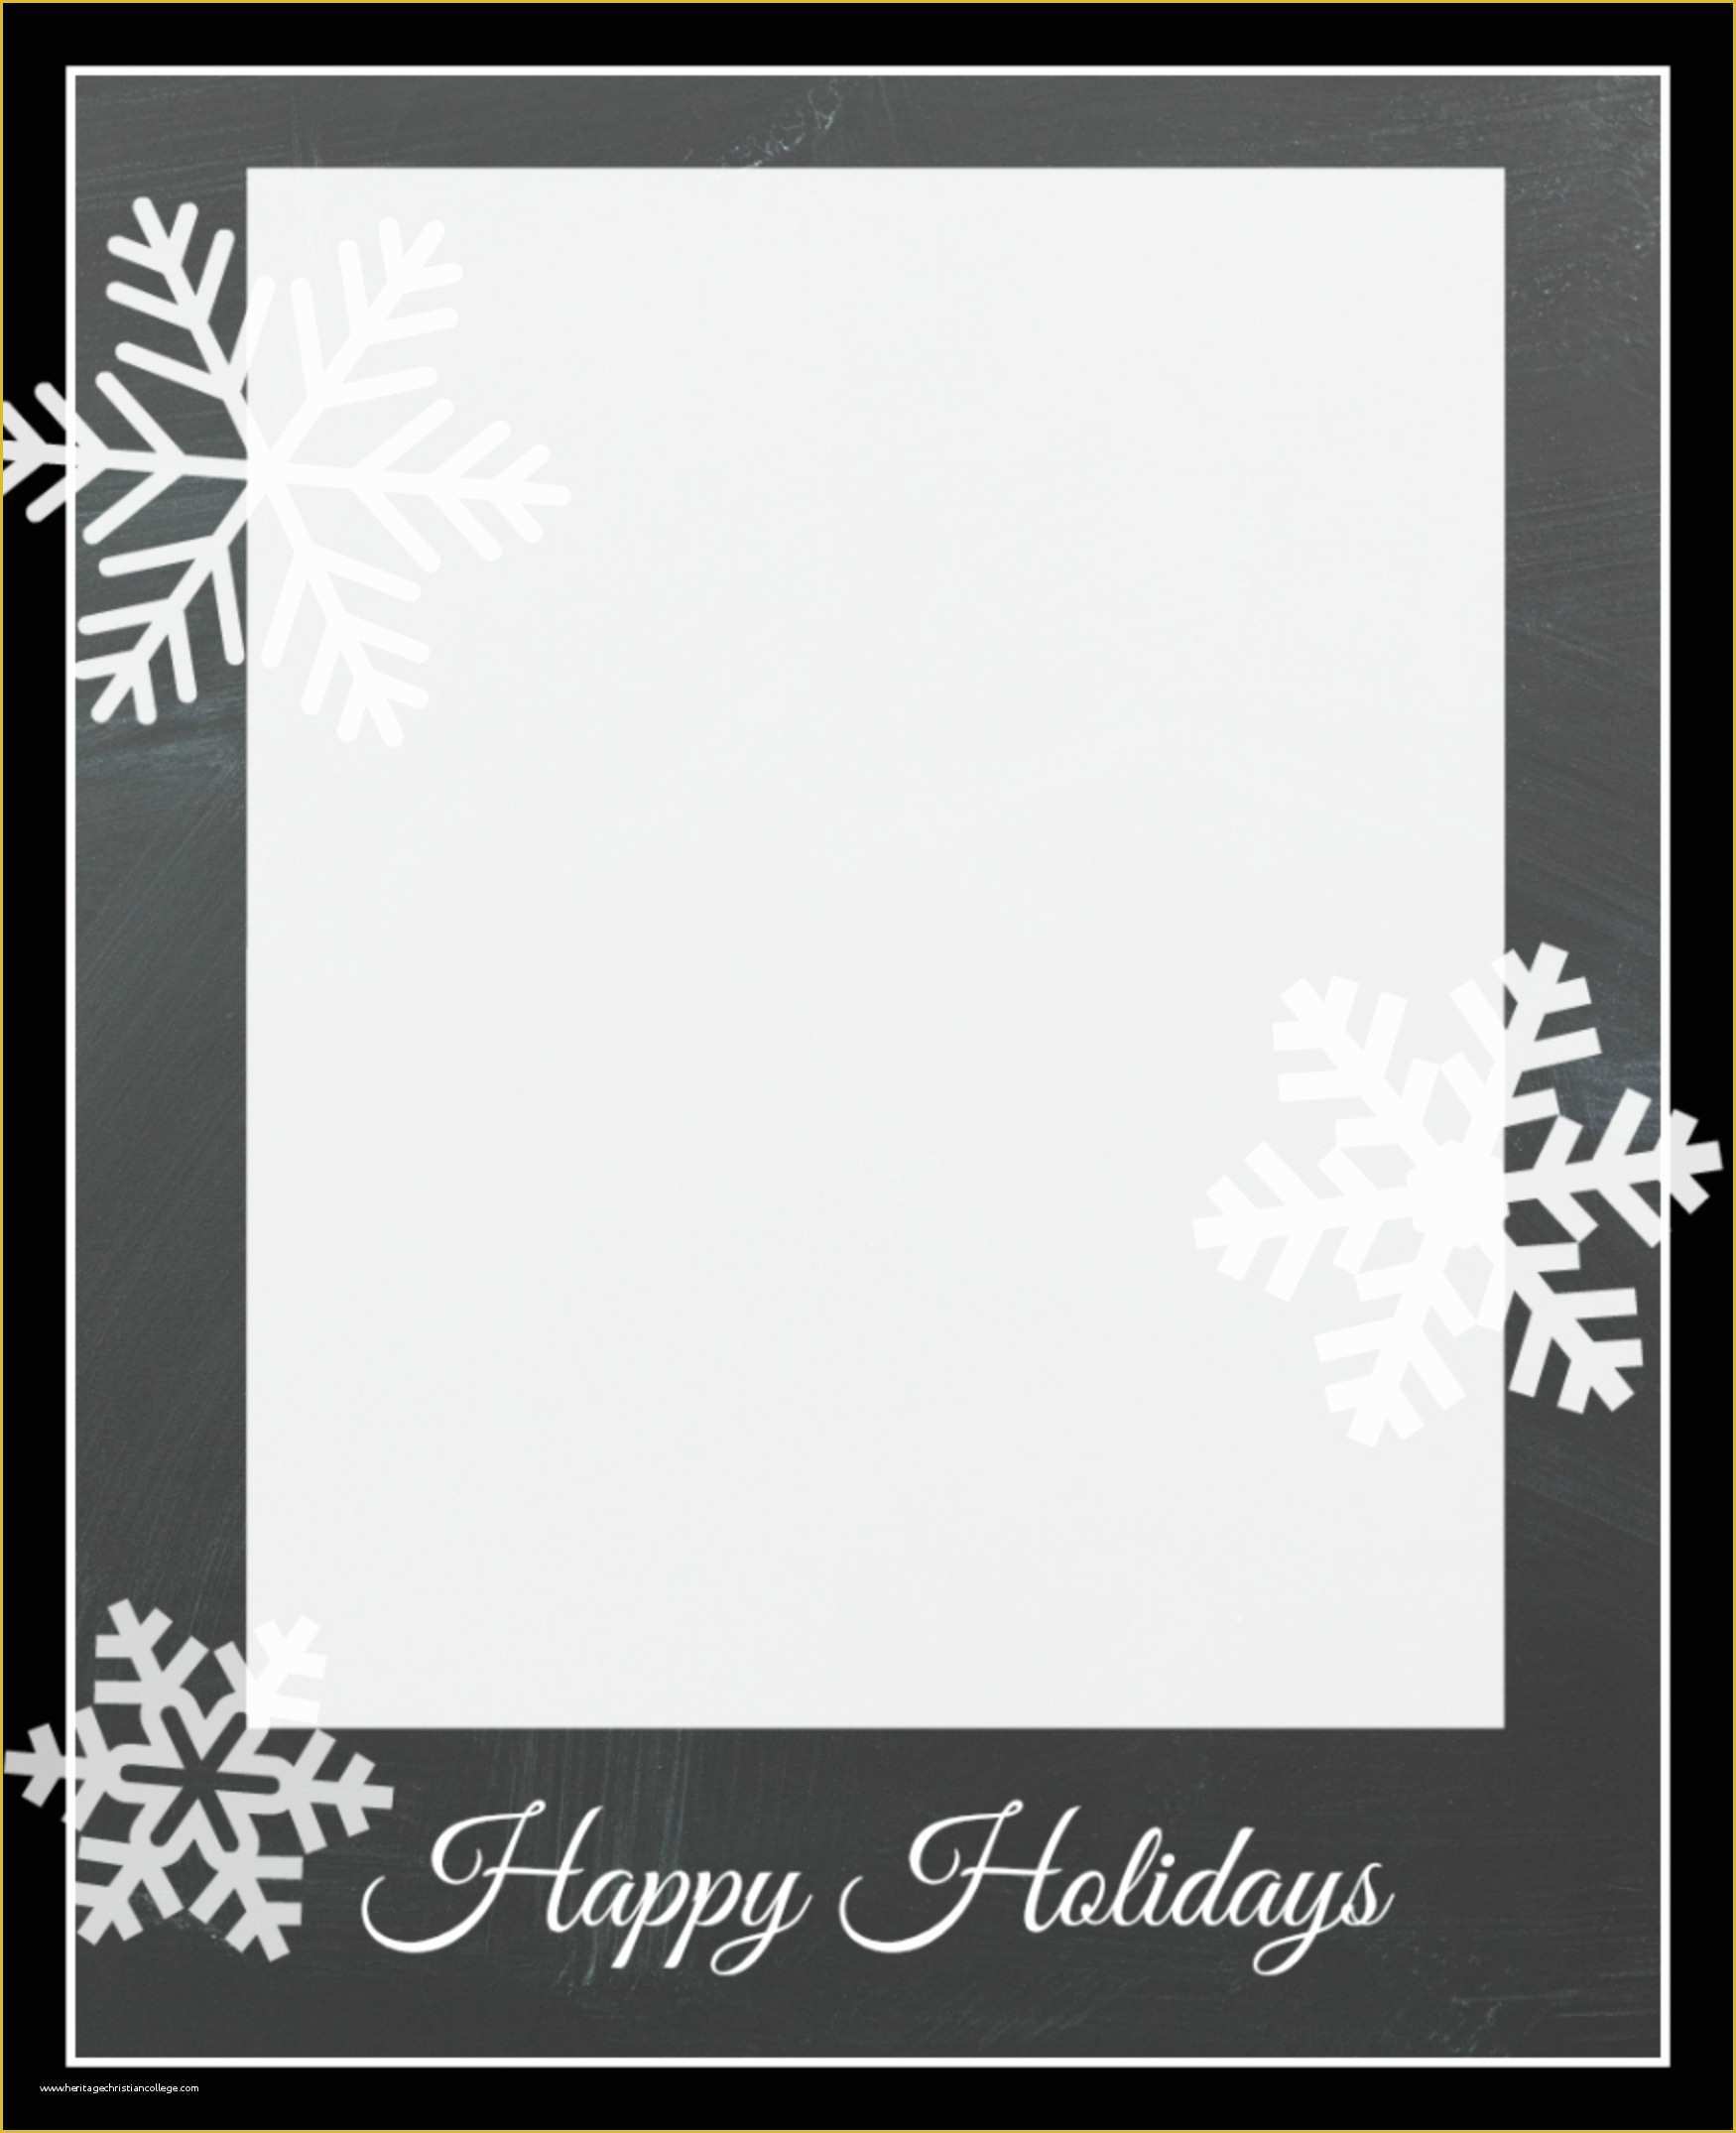 Christmas Cards Templates Free Downloads Of Free Christmas Card Templates Crazy Little Projects